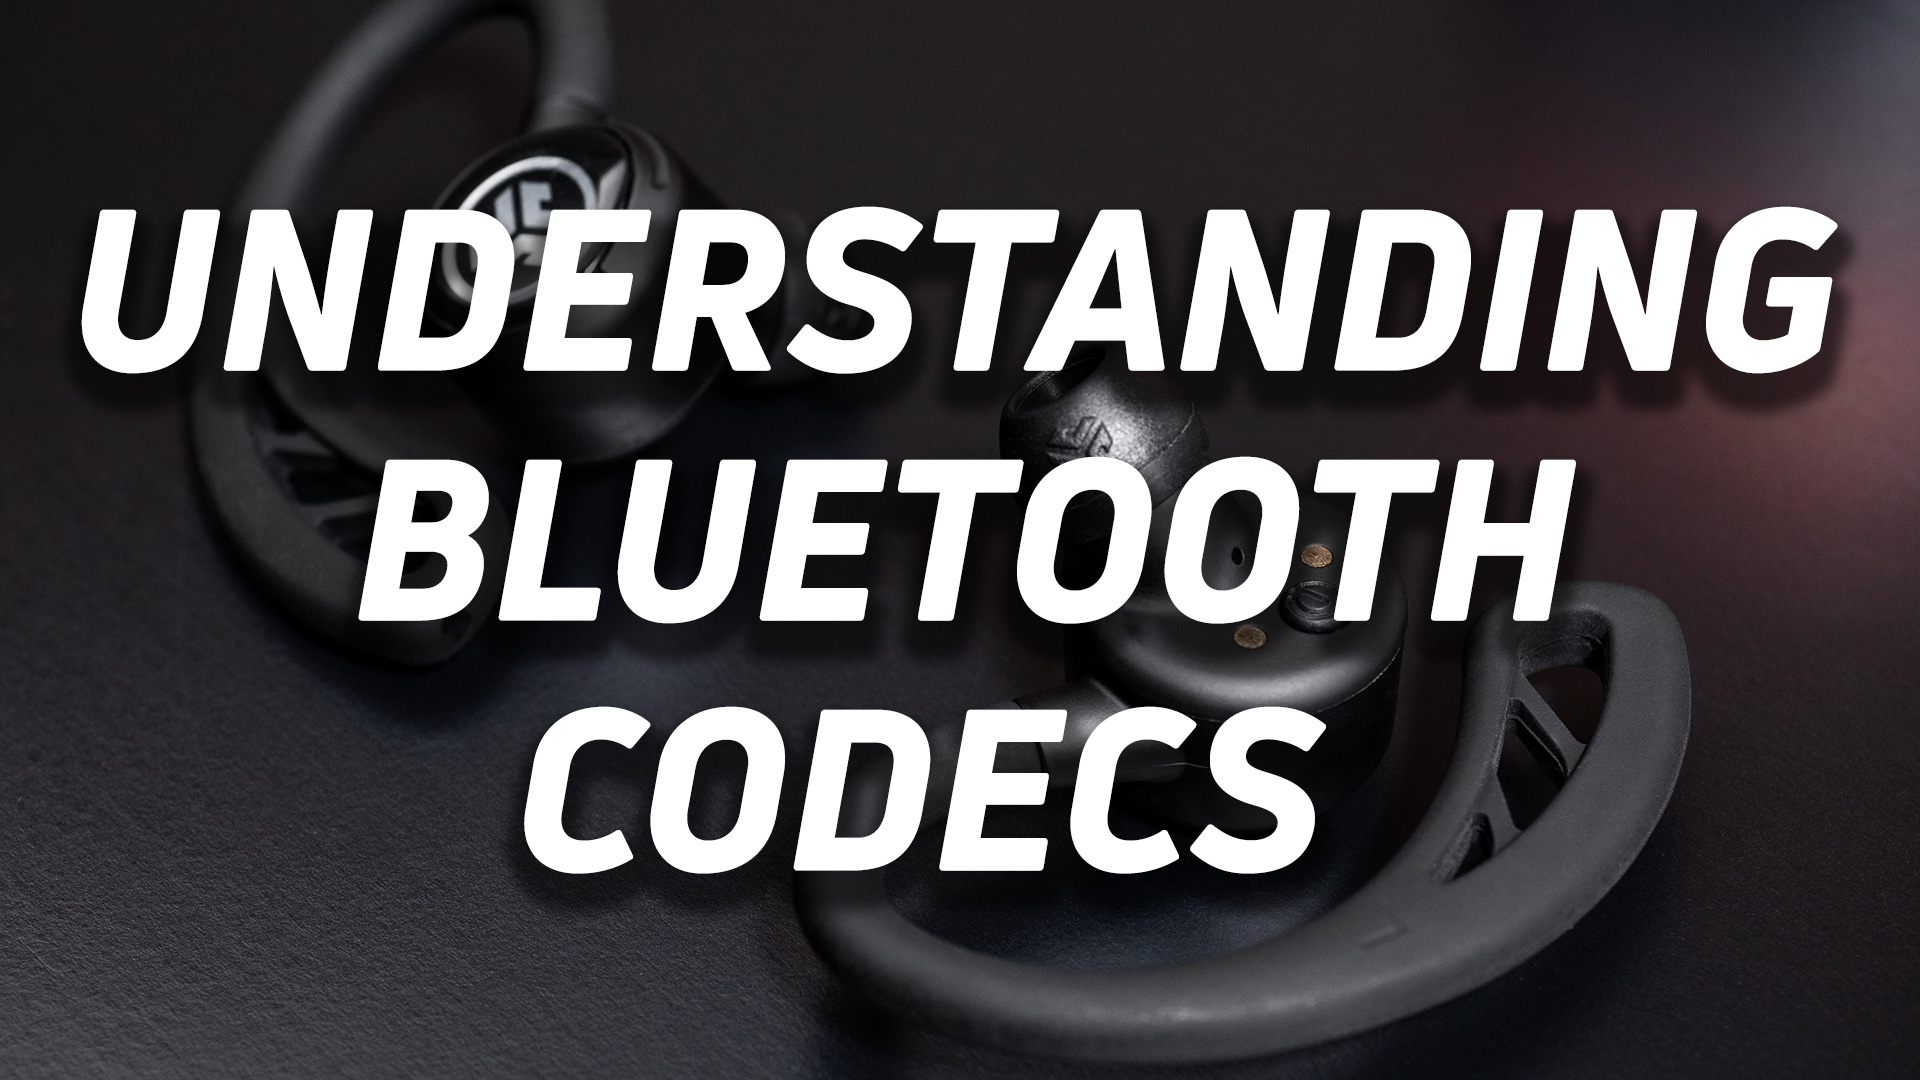 Title card which reads, "undersetanding Bluetooth codecs" overlayed atop an image of the JLab Epic Air Elite true wireless earbuds.